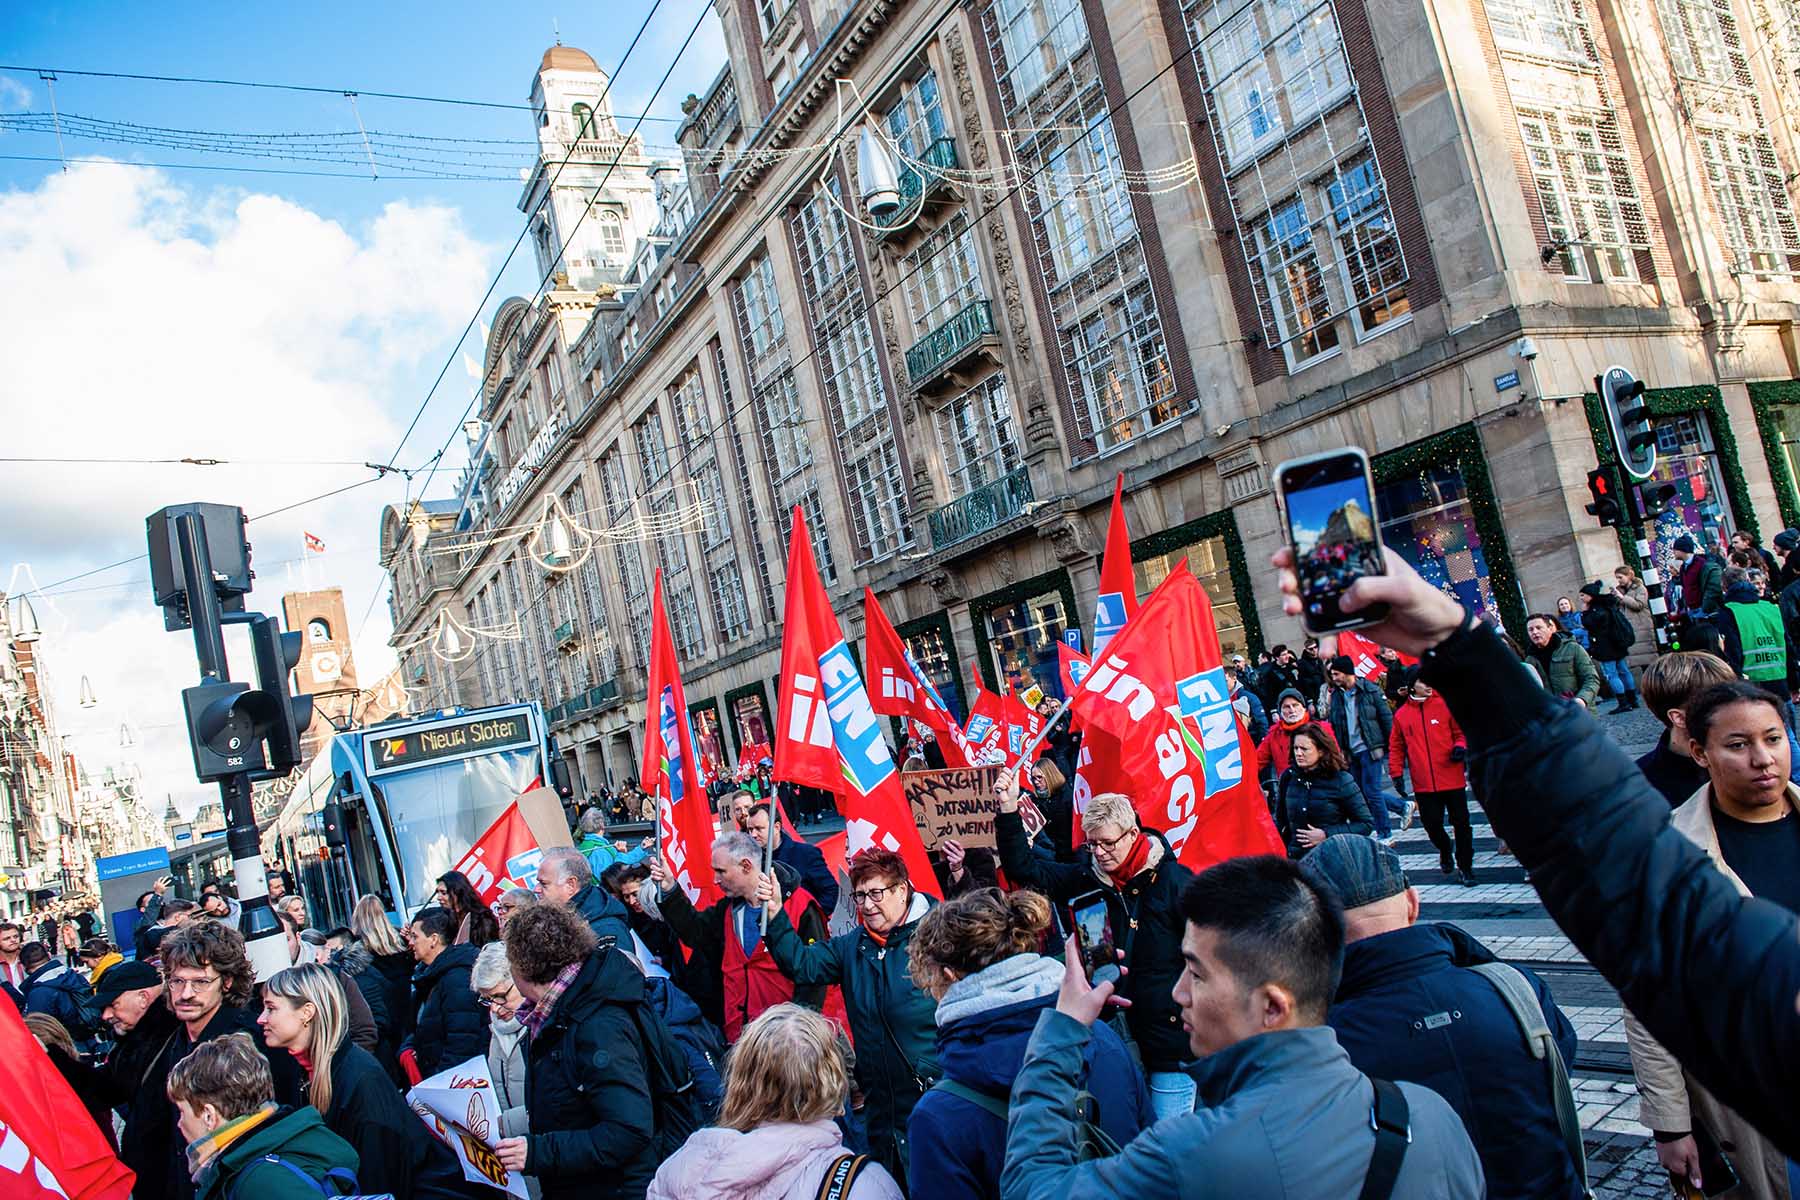 Protesters march in front of the department store De Bijenkorf in Amsterdam, the Netherlands, during a 2022 workers' strike. Employees took to the streets demanding higher wages and better conditions. Several workers carry red flags from the Netherlands Trade Union Confederation (FNV), which announced the strike.